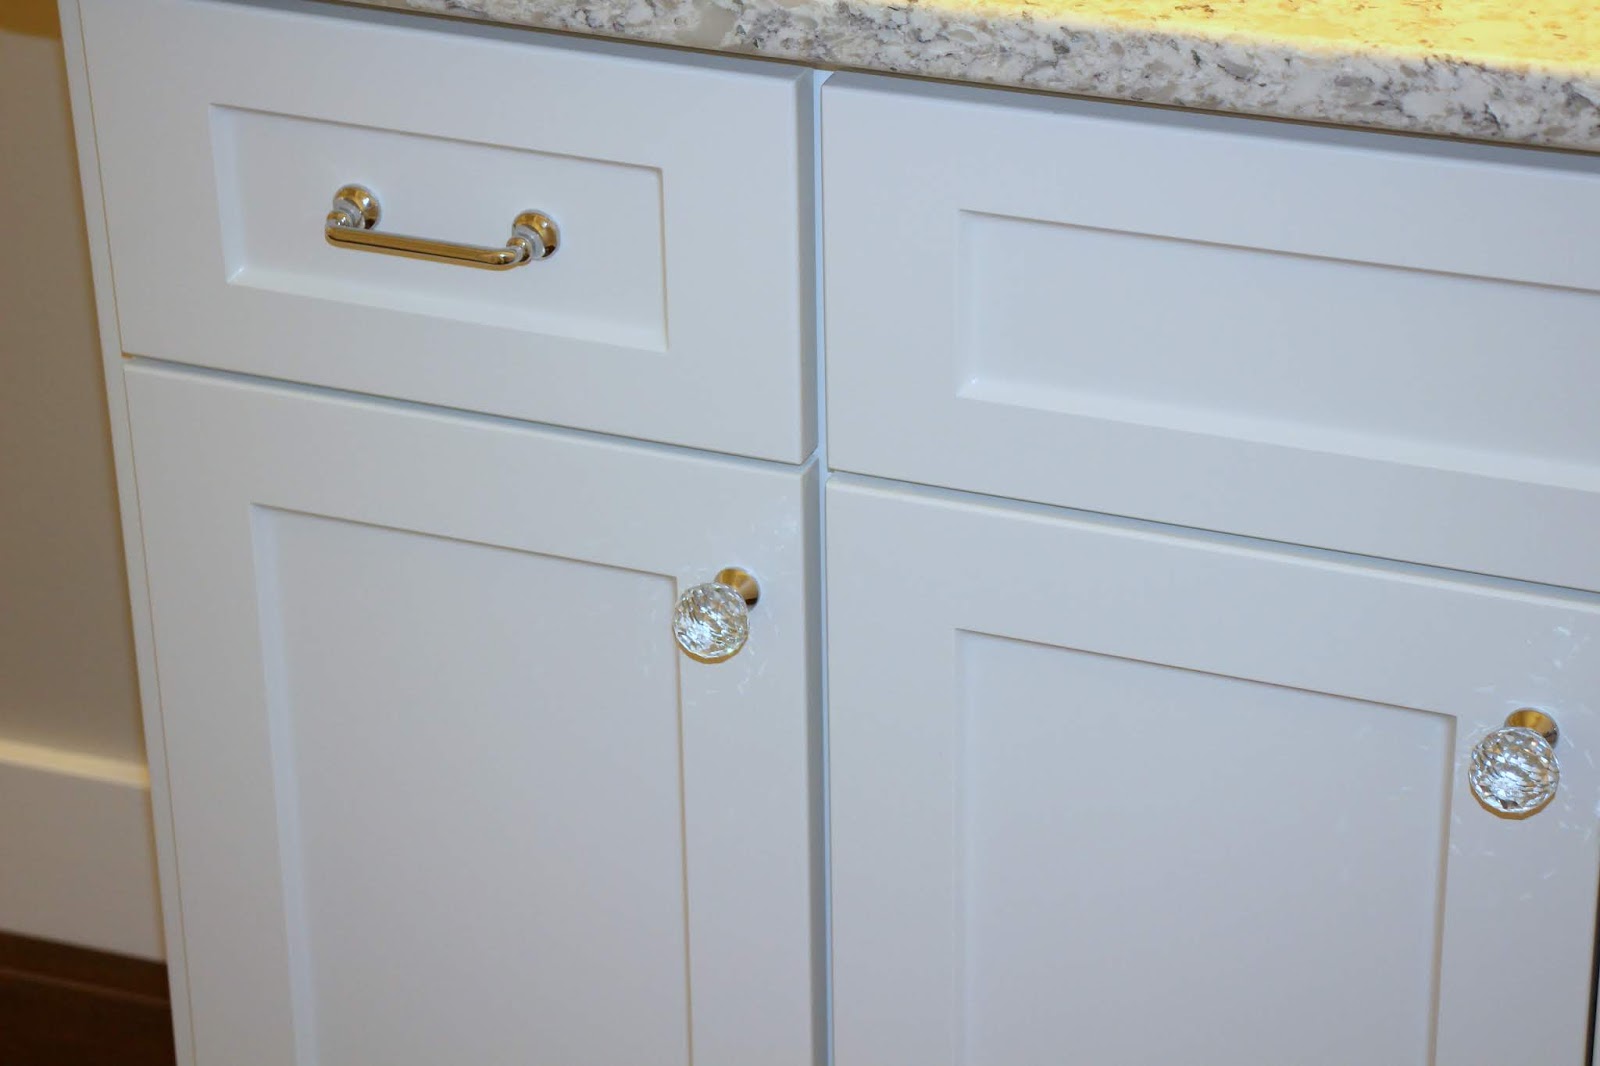 July 2018 Stories From The Sewing Room, Menards Dresser Knobs